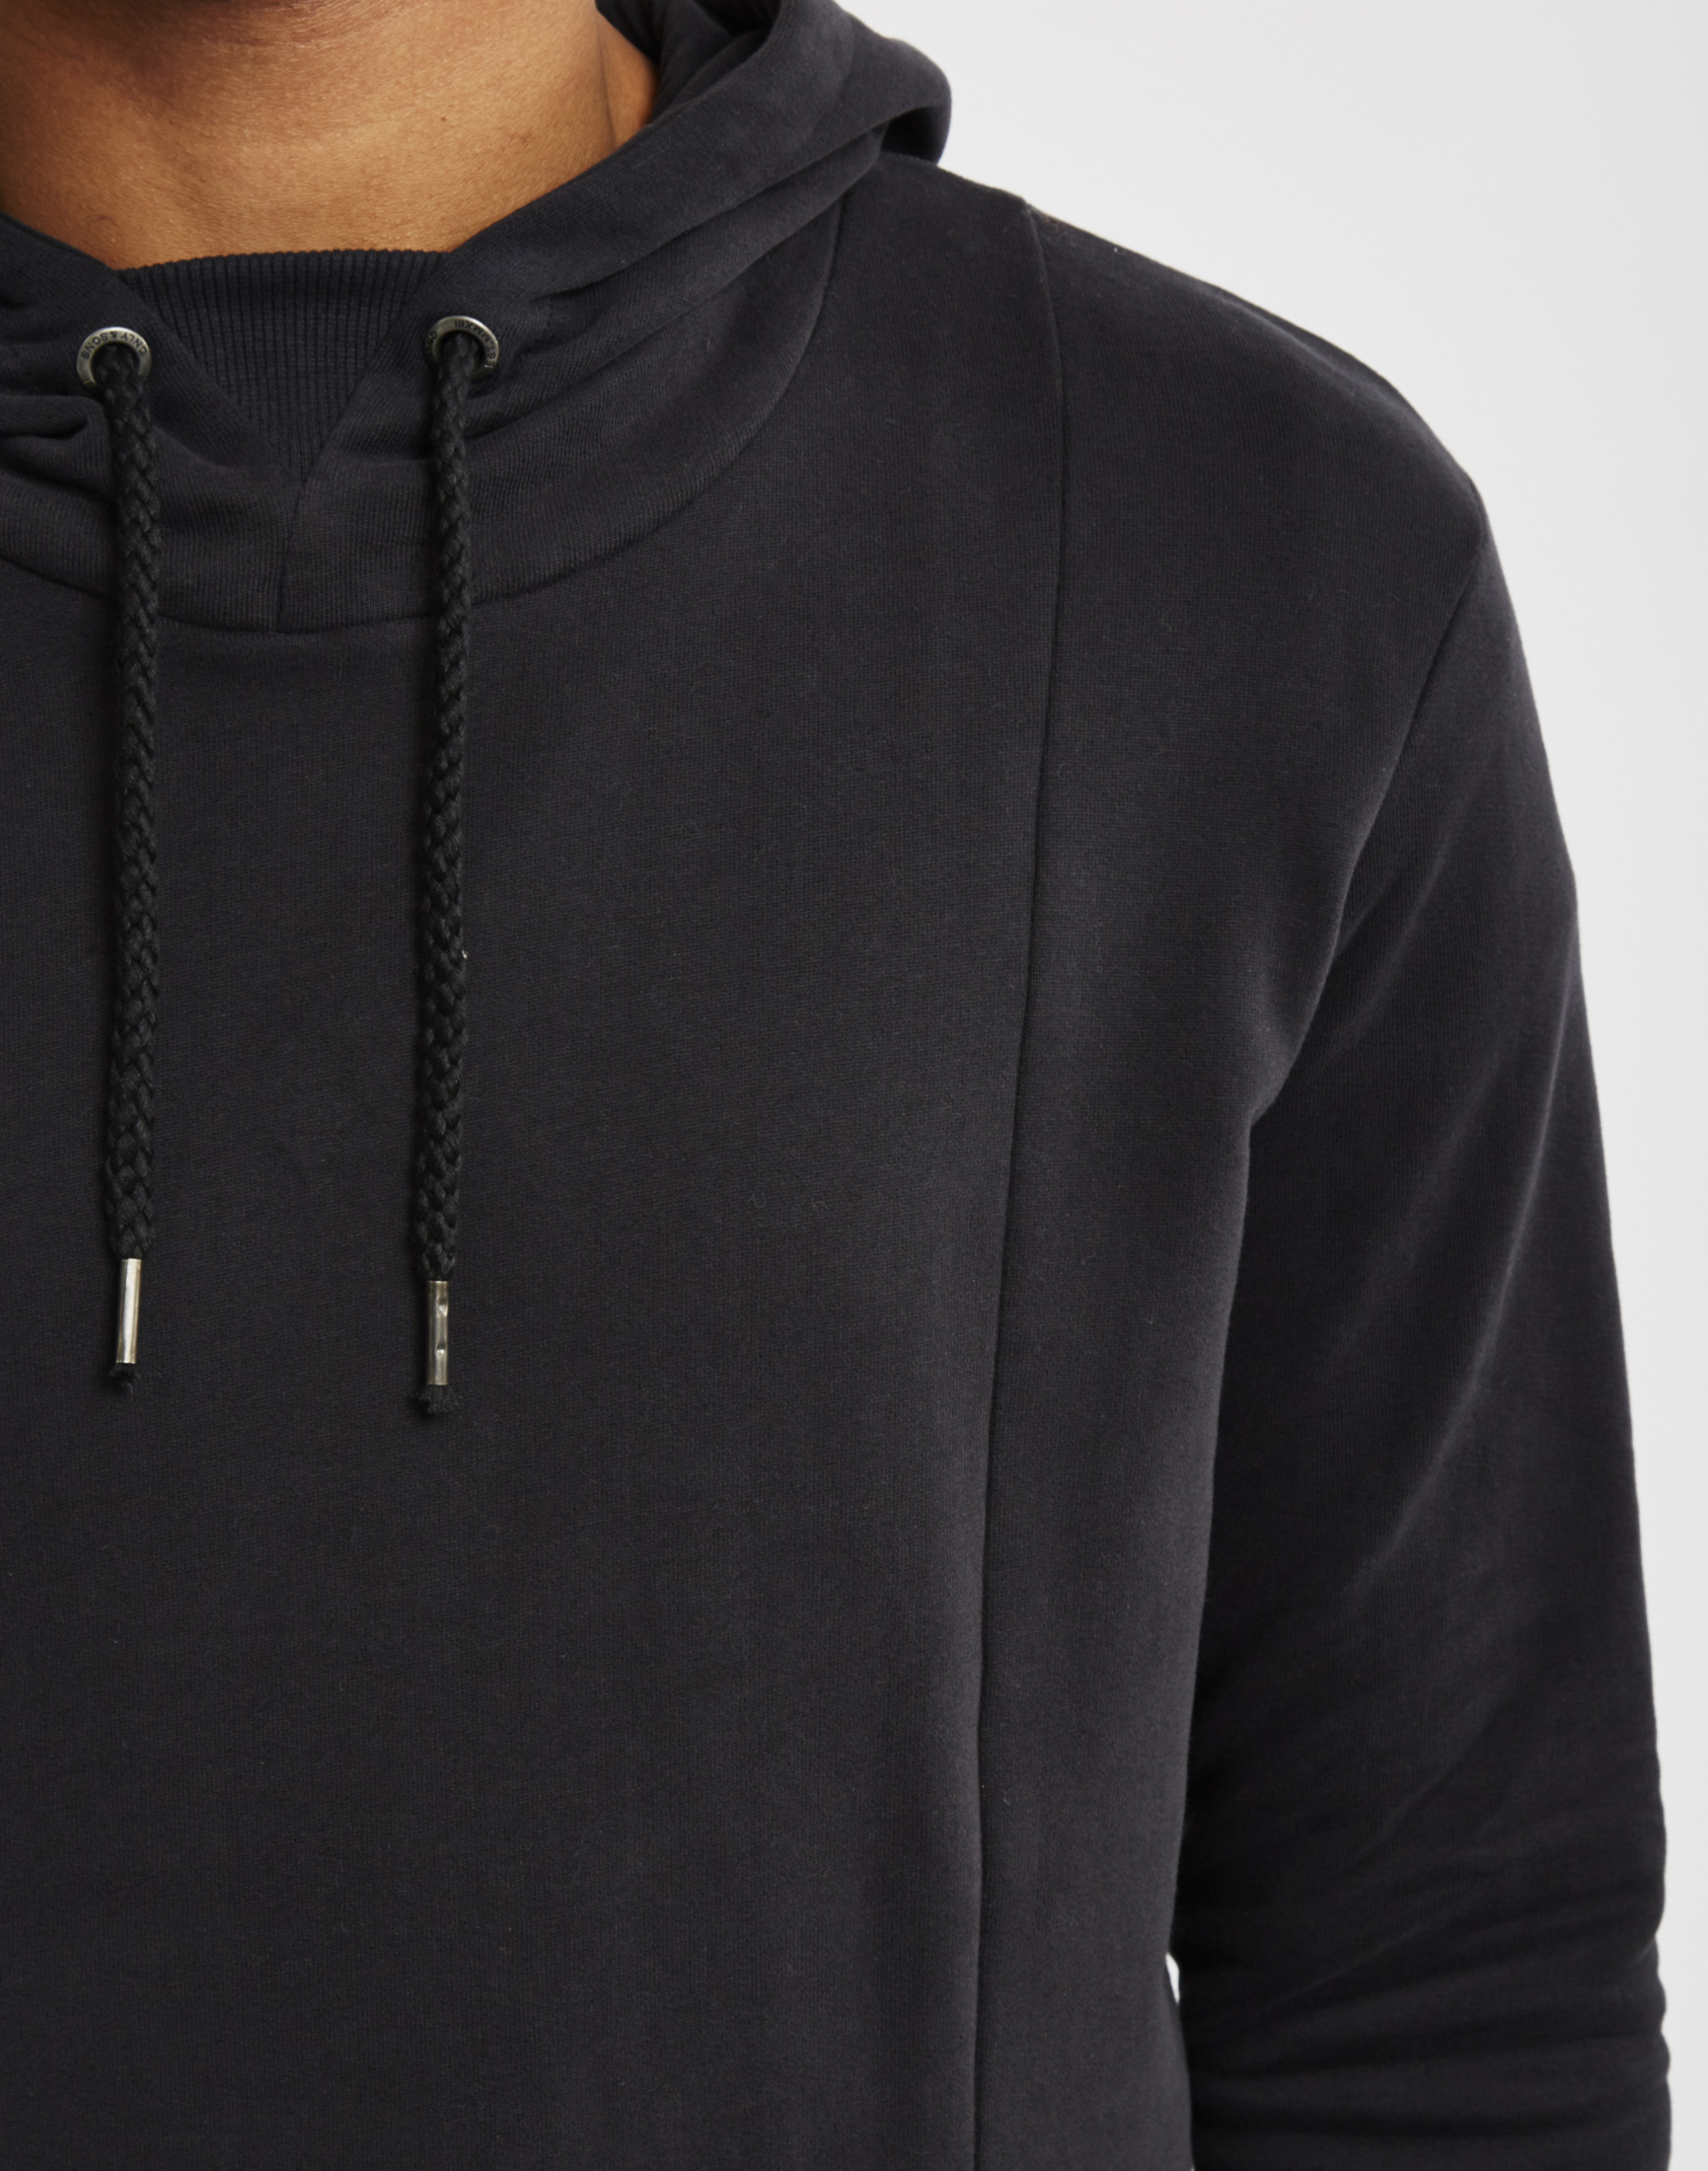 Only & Sons Mens Hoodie With Cut Line Details Black in Black for Men - Lyst